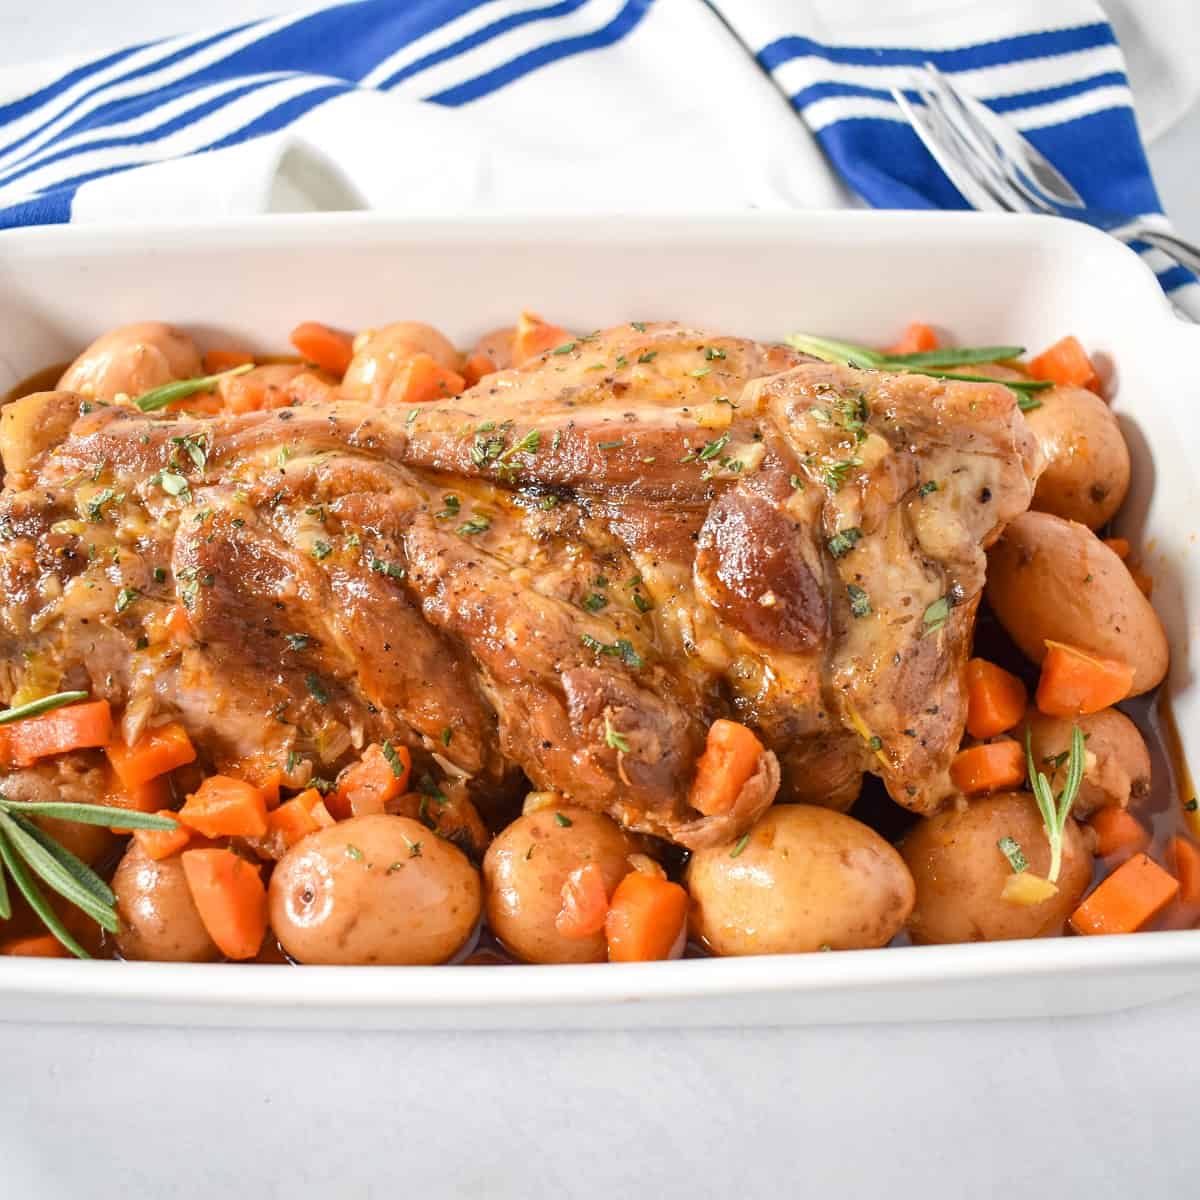 An image of the finished pork pot roast served with the potatoes and carrots in a white baking dish with a blue and white kitchen towel in the background.